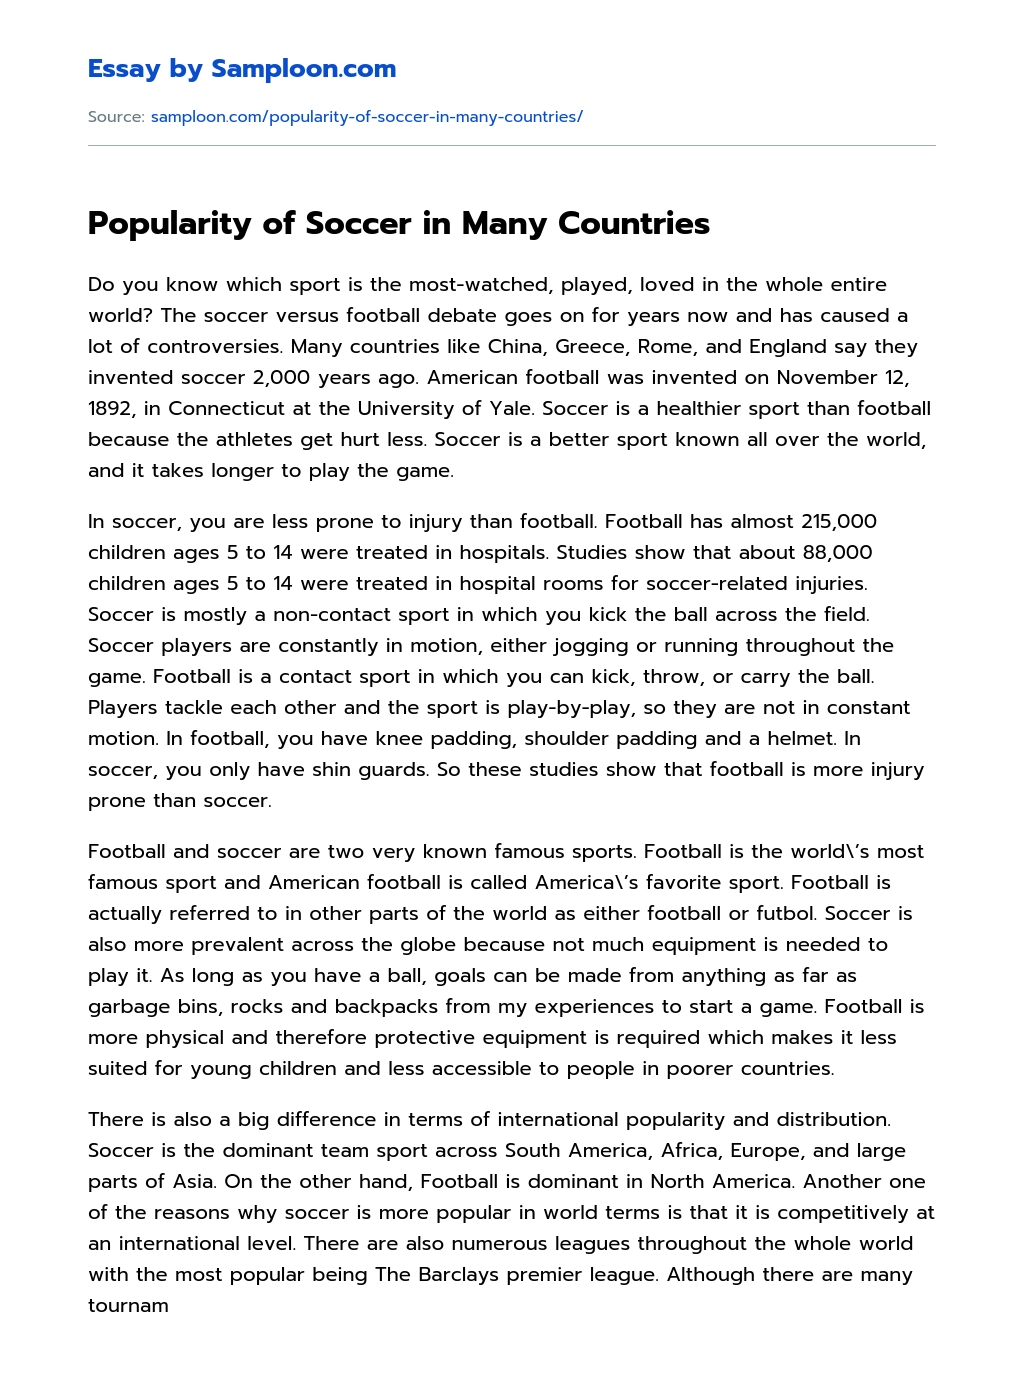 Popularity of Soccer in Many Countries essay